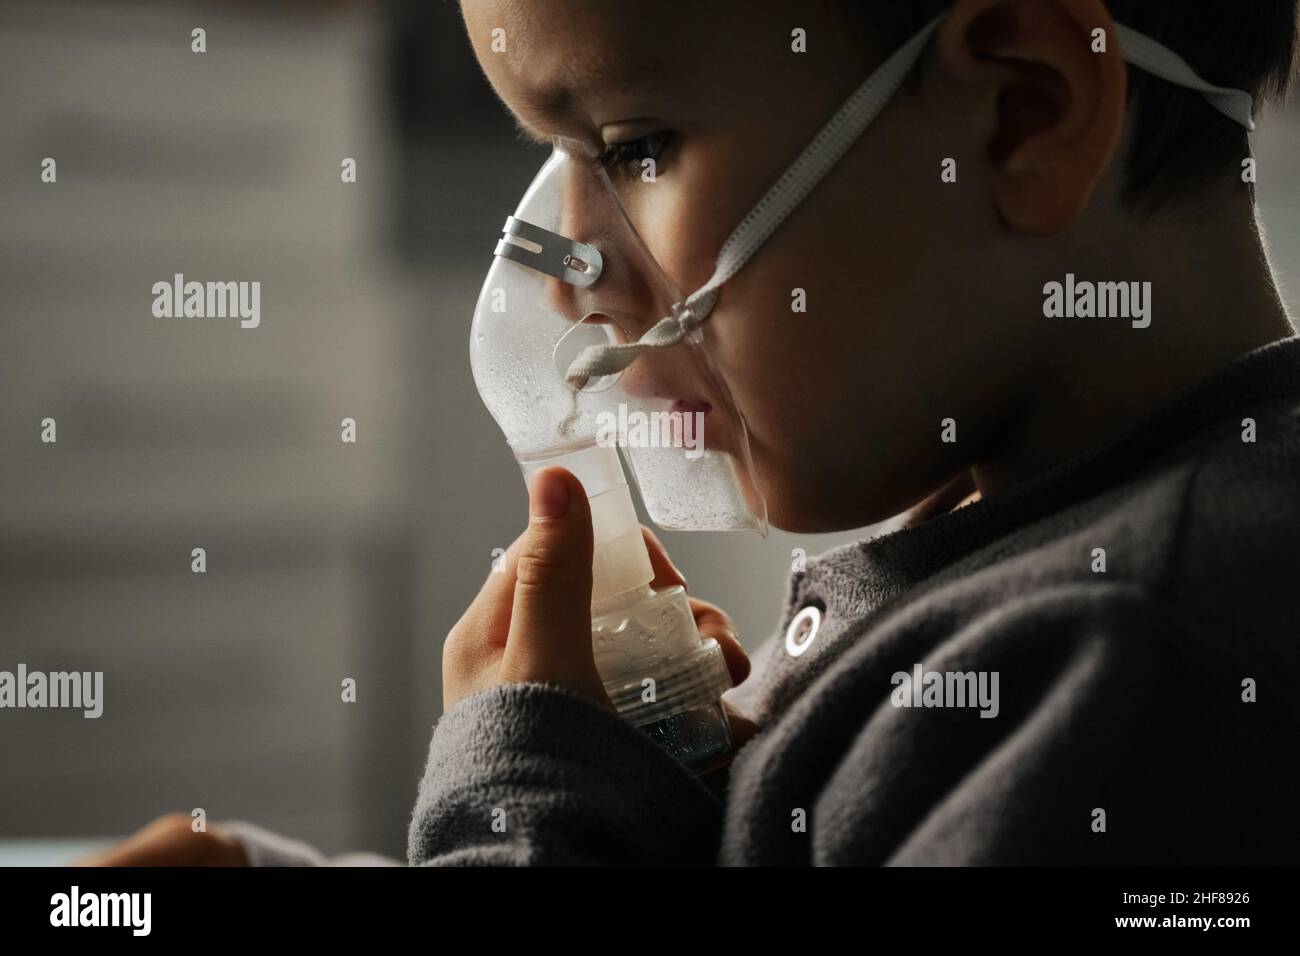 Home treatment. The boy makes inhalation with a nebulizer inhaling medicines into his lungs. Self-treatment of the respiratory tract with inhalation. Stock Photo